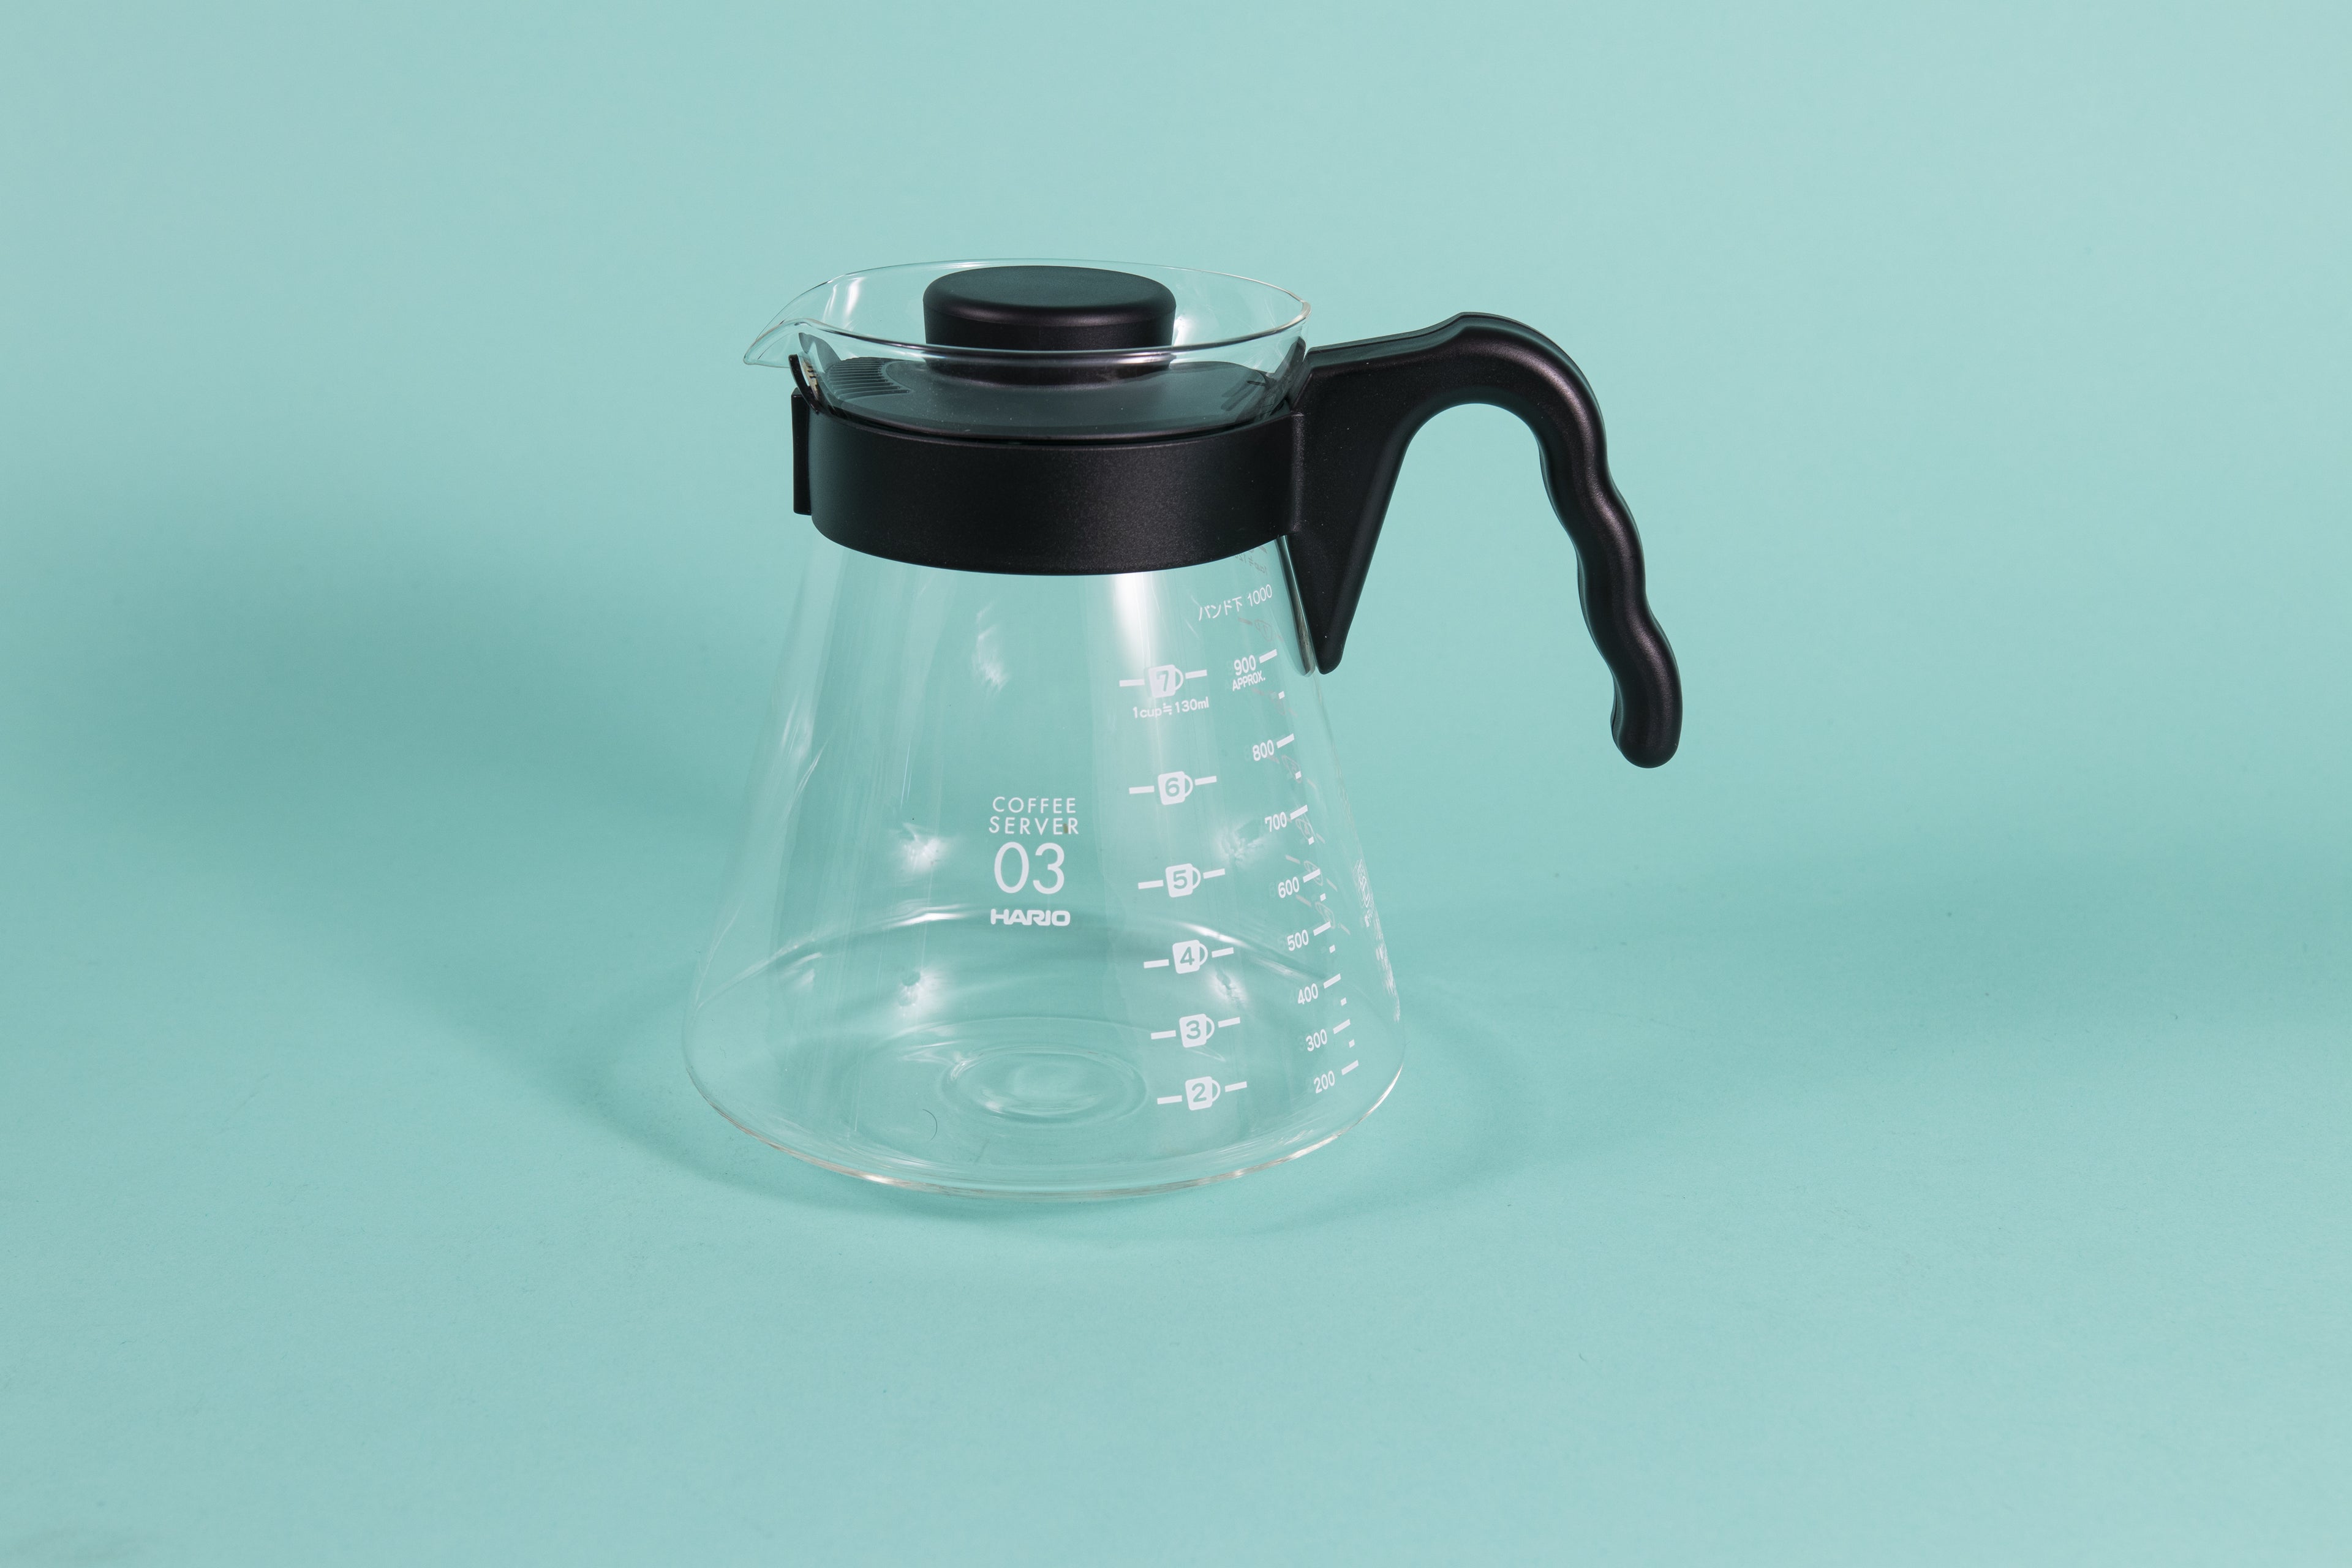 Glass coffee server with white text and level markings with black hard plastic handle and lid on a teal backdrop.